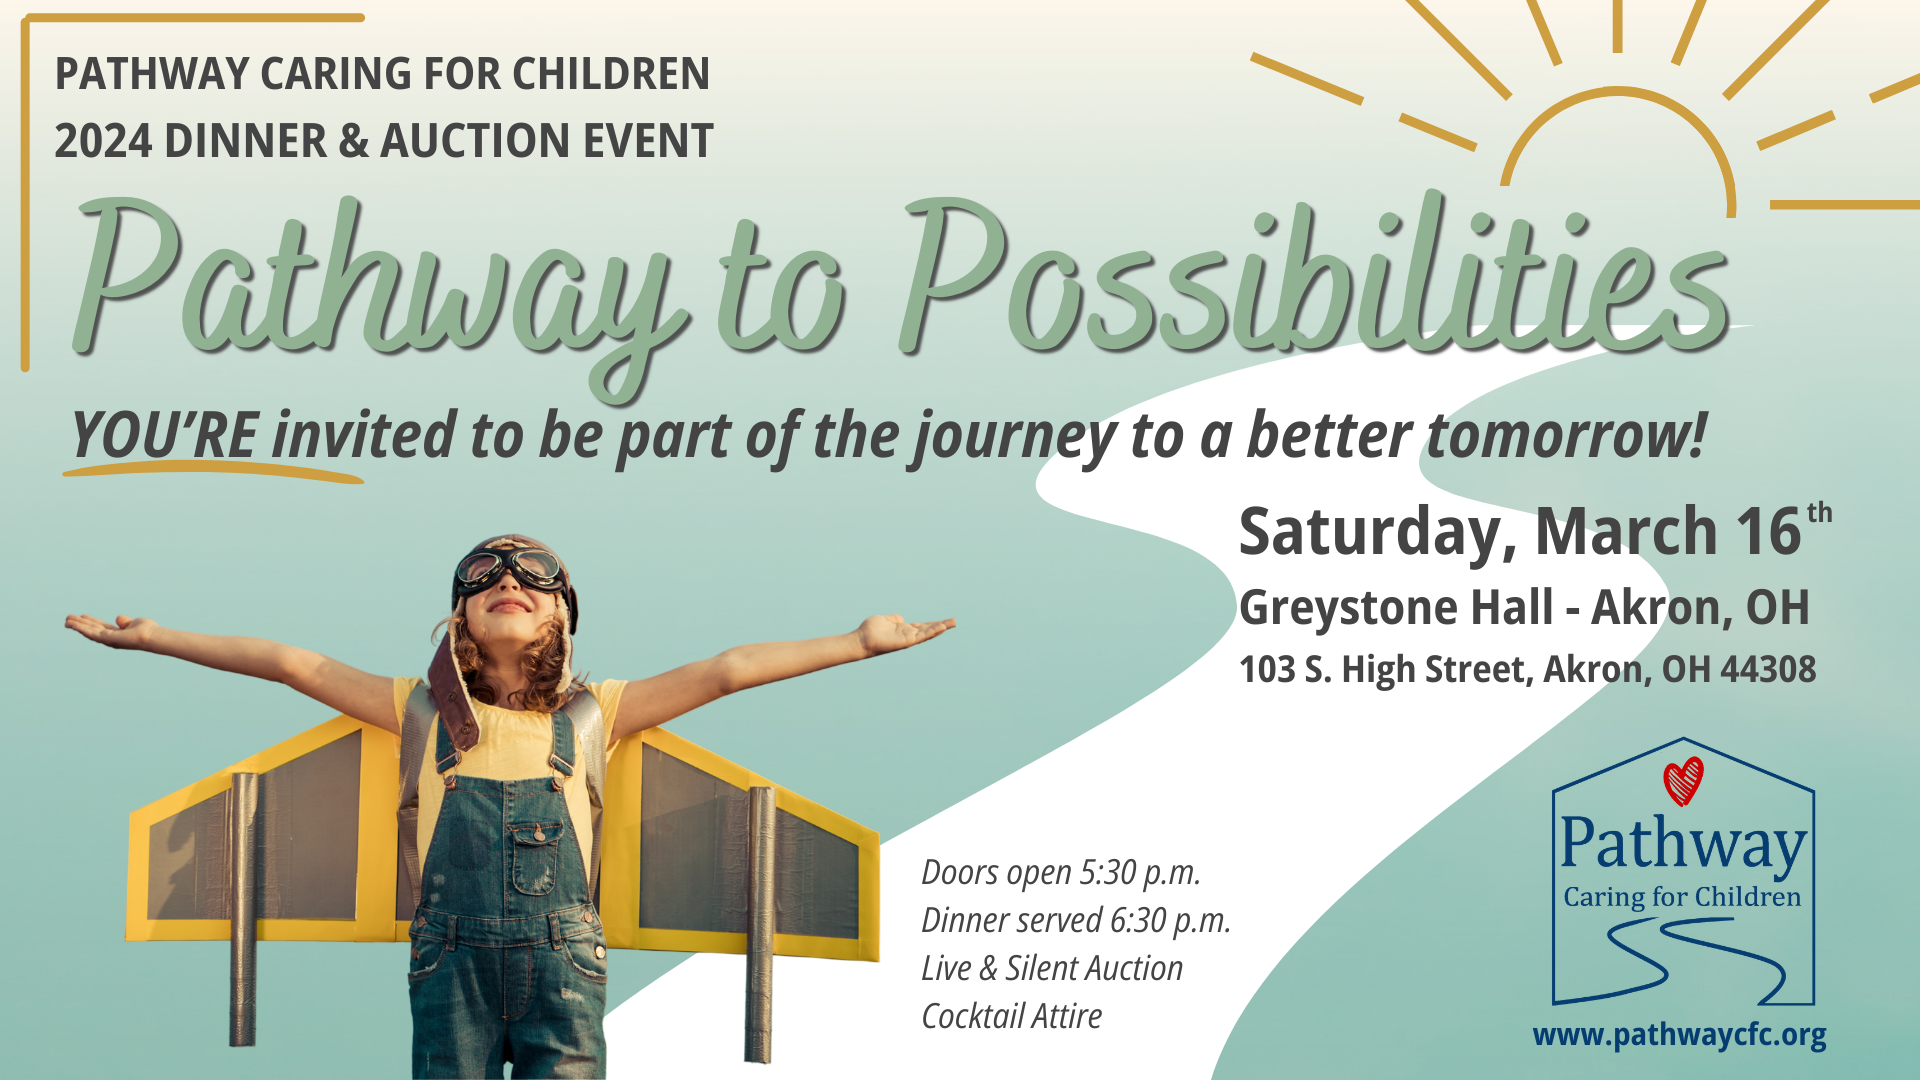 Pathway to Possibilities Auction Event